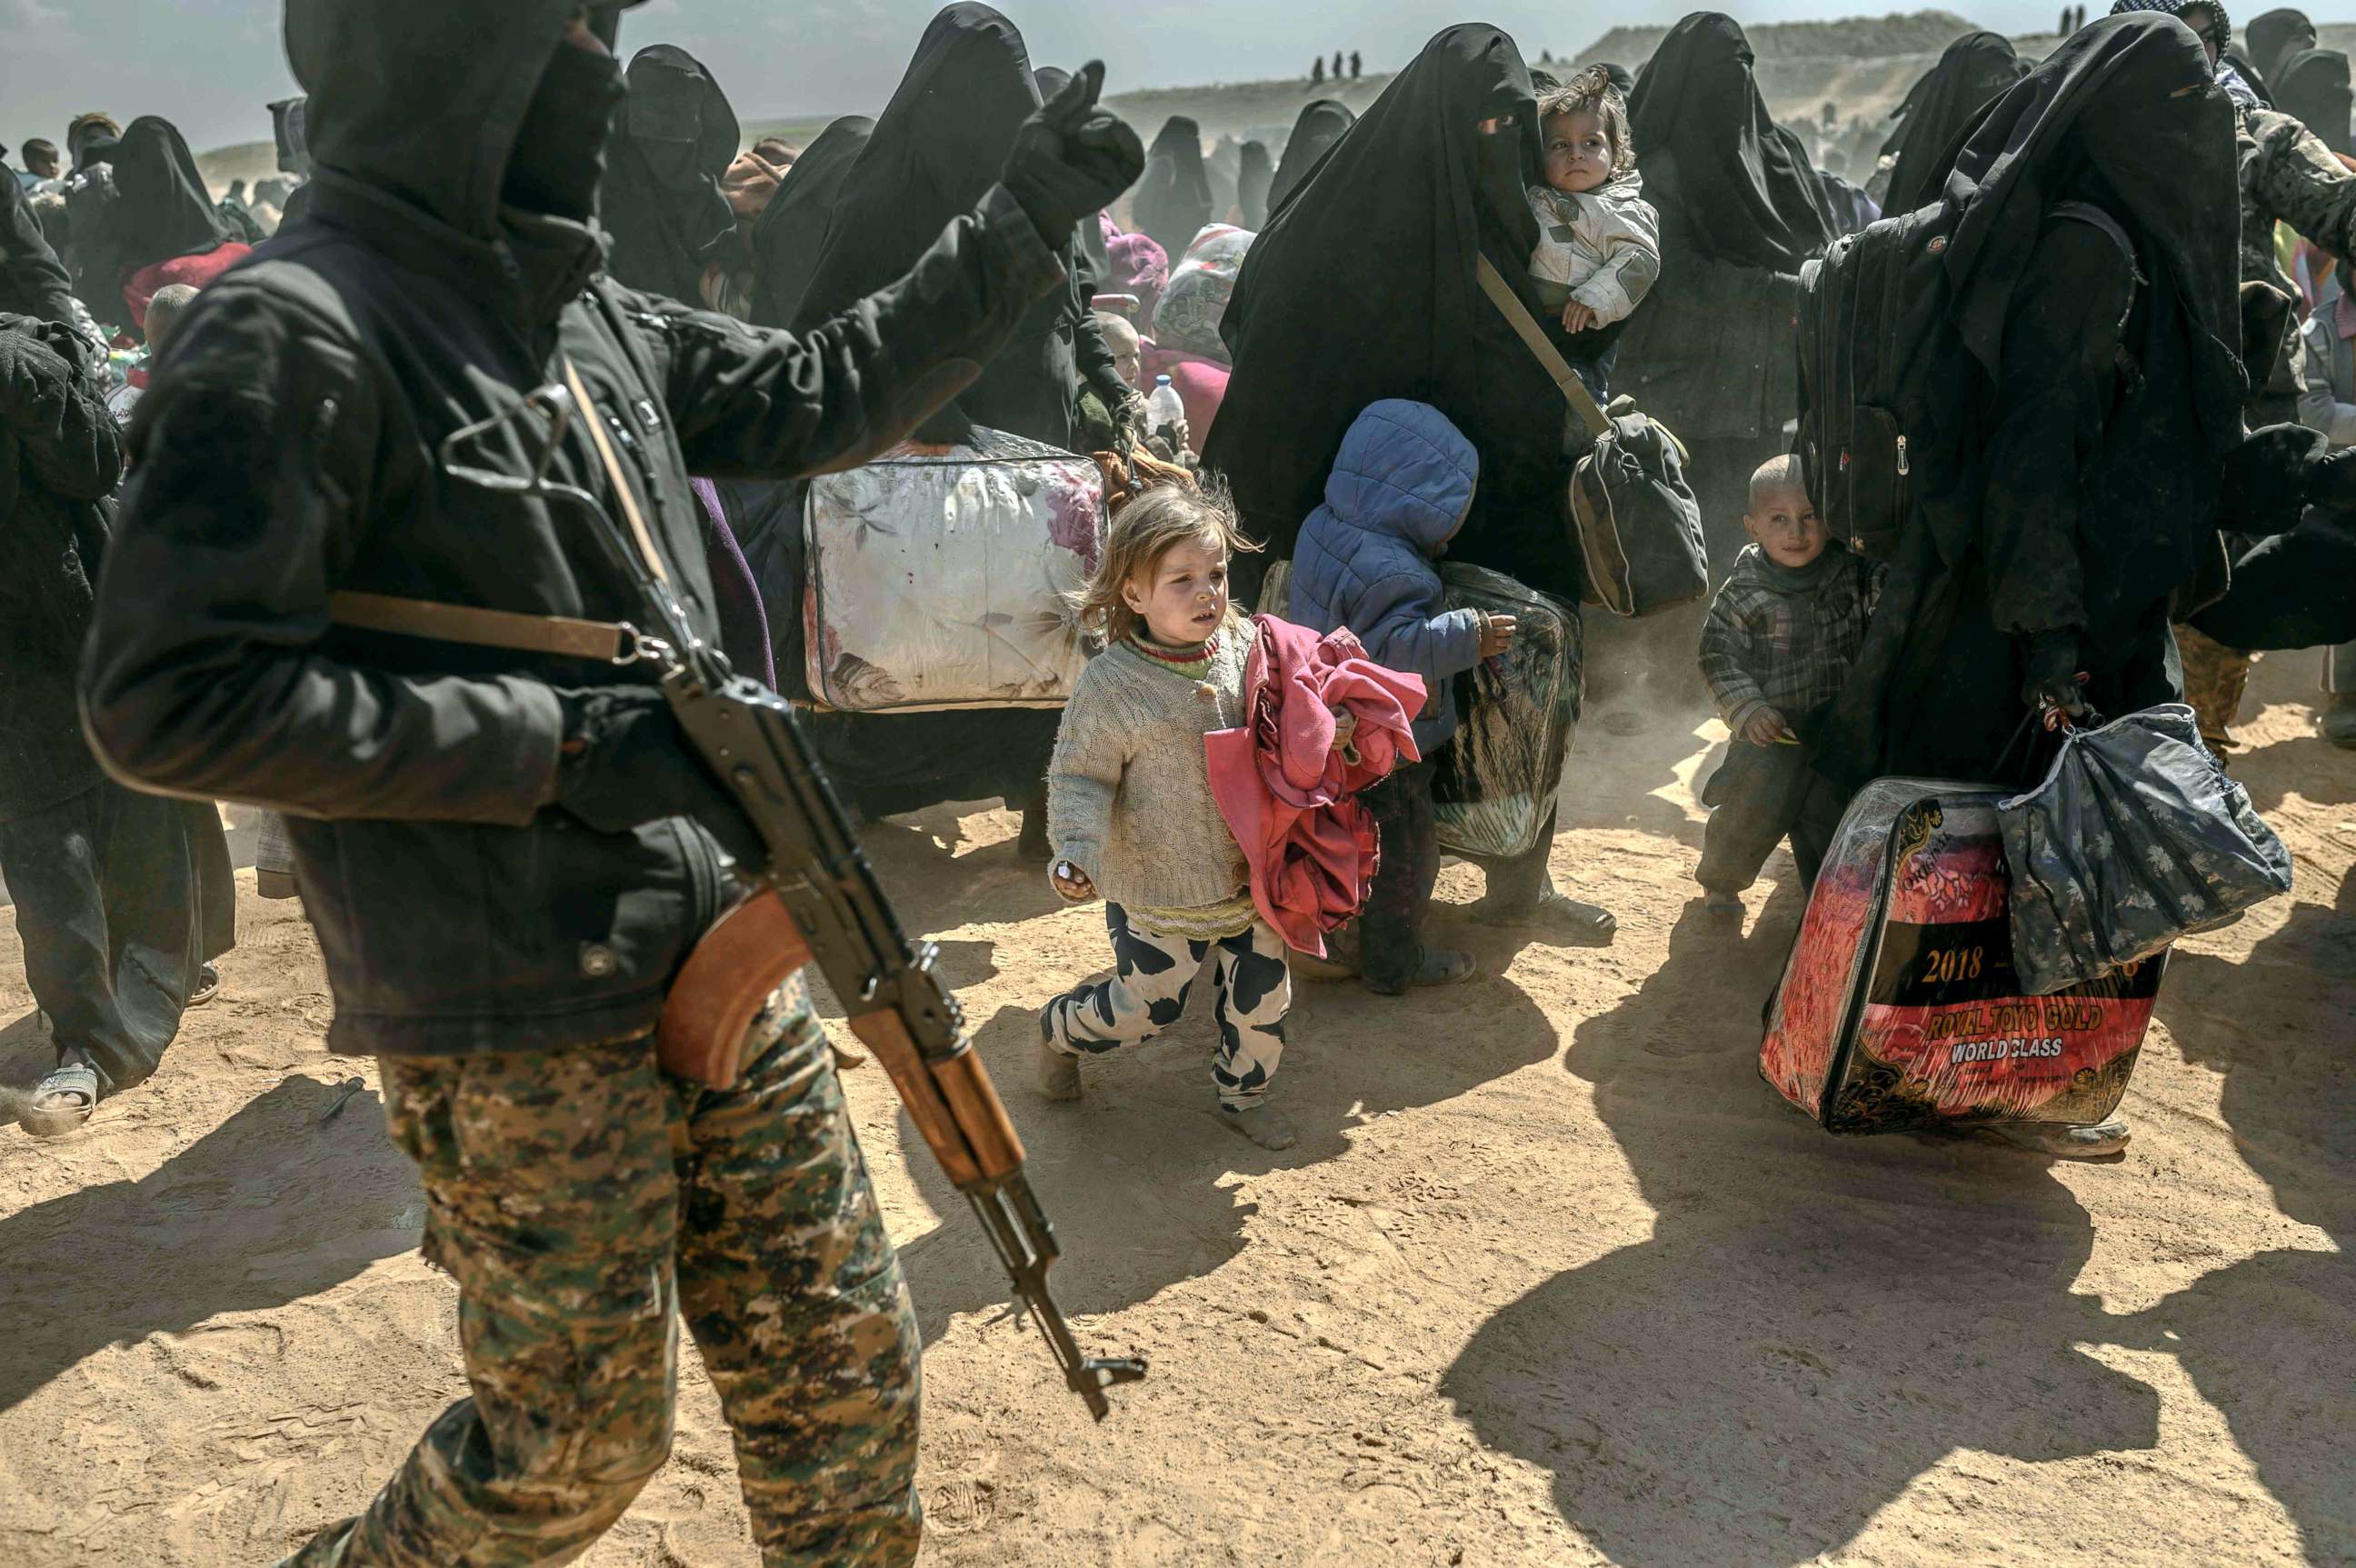 PHOTO: Women and children, evacuated from the Islamic State group's embattled holdout of Baghouz, arrive at a screening area held by the US-backed Kurdish-led Syrian Democratic Forces in Deir Ezzor, Syria, March 6, 2019.